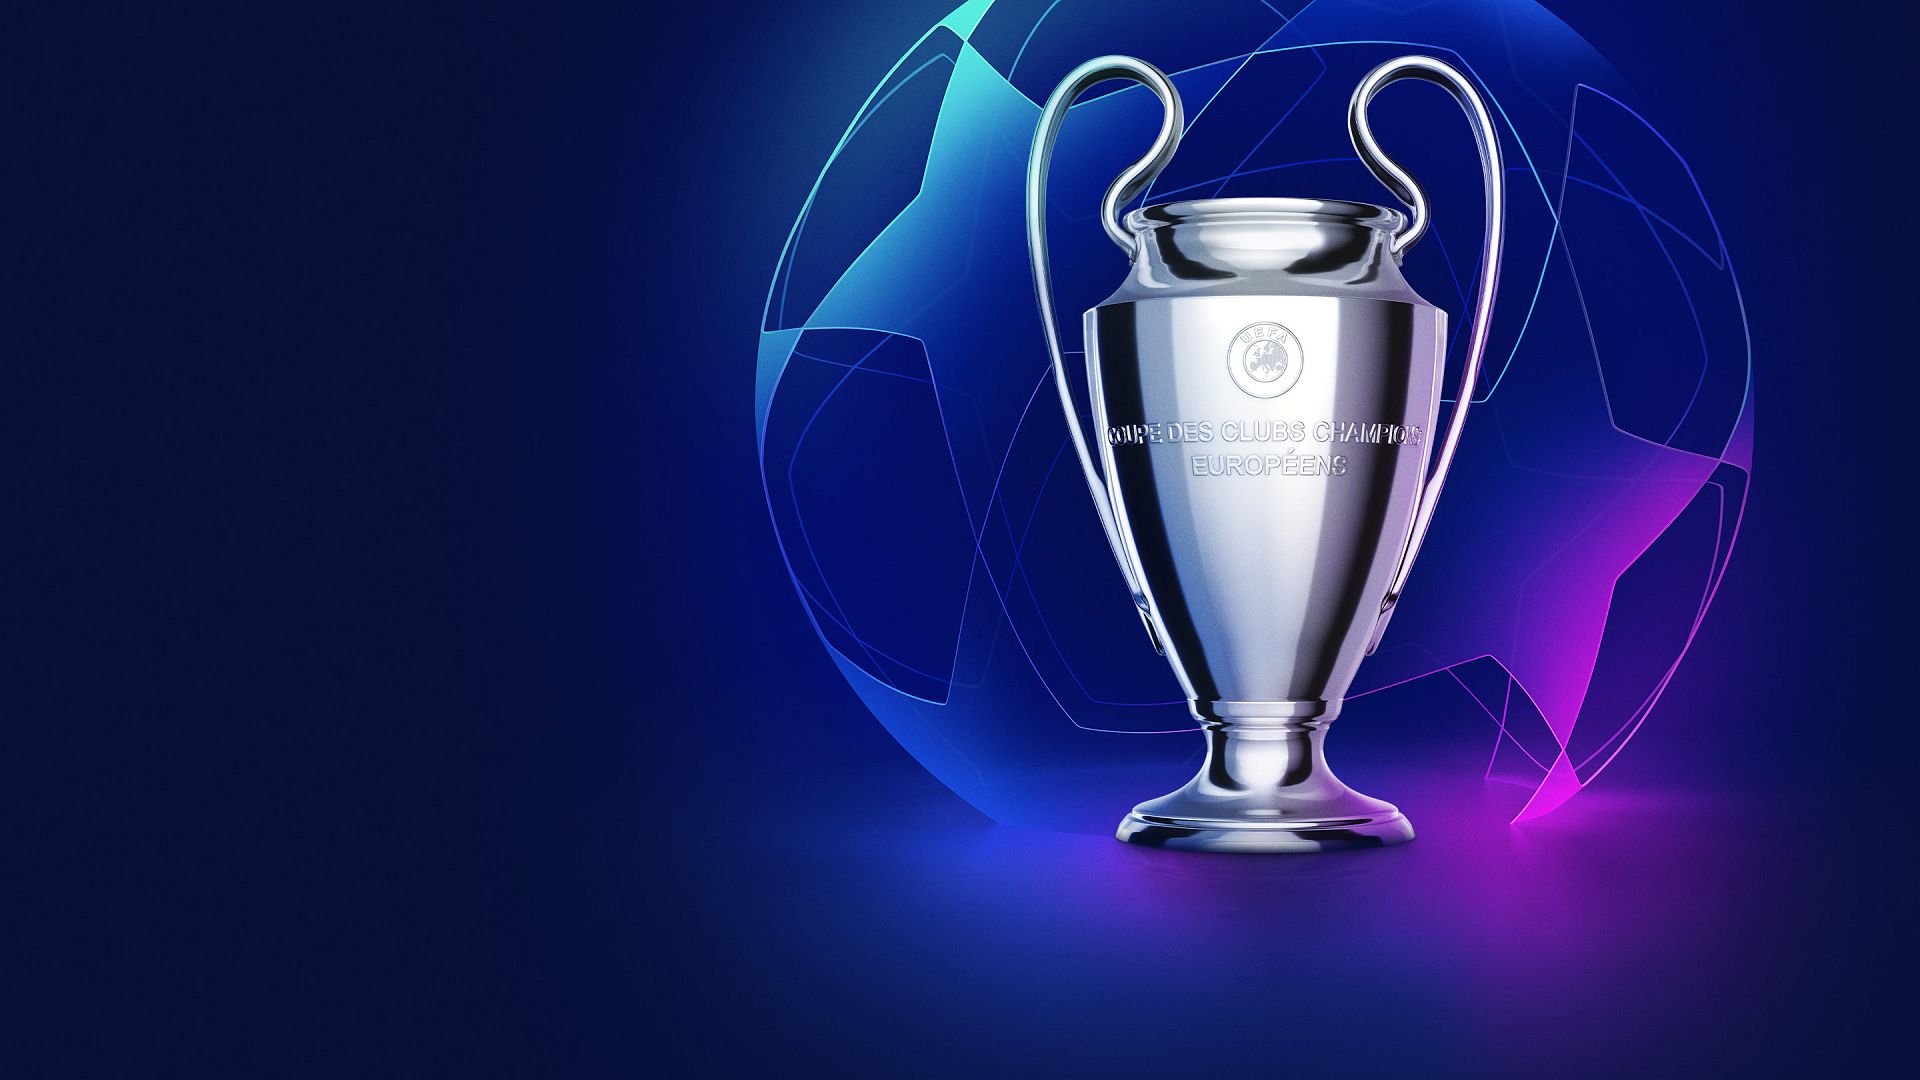 2C74AAD7 5570 4D68 8540 8CA8E95A653C - What the Champions League Round of 16 brings